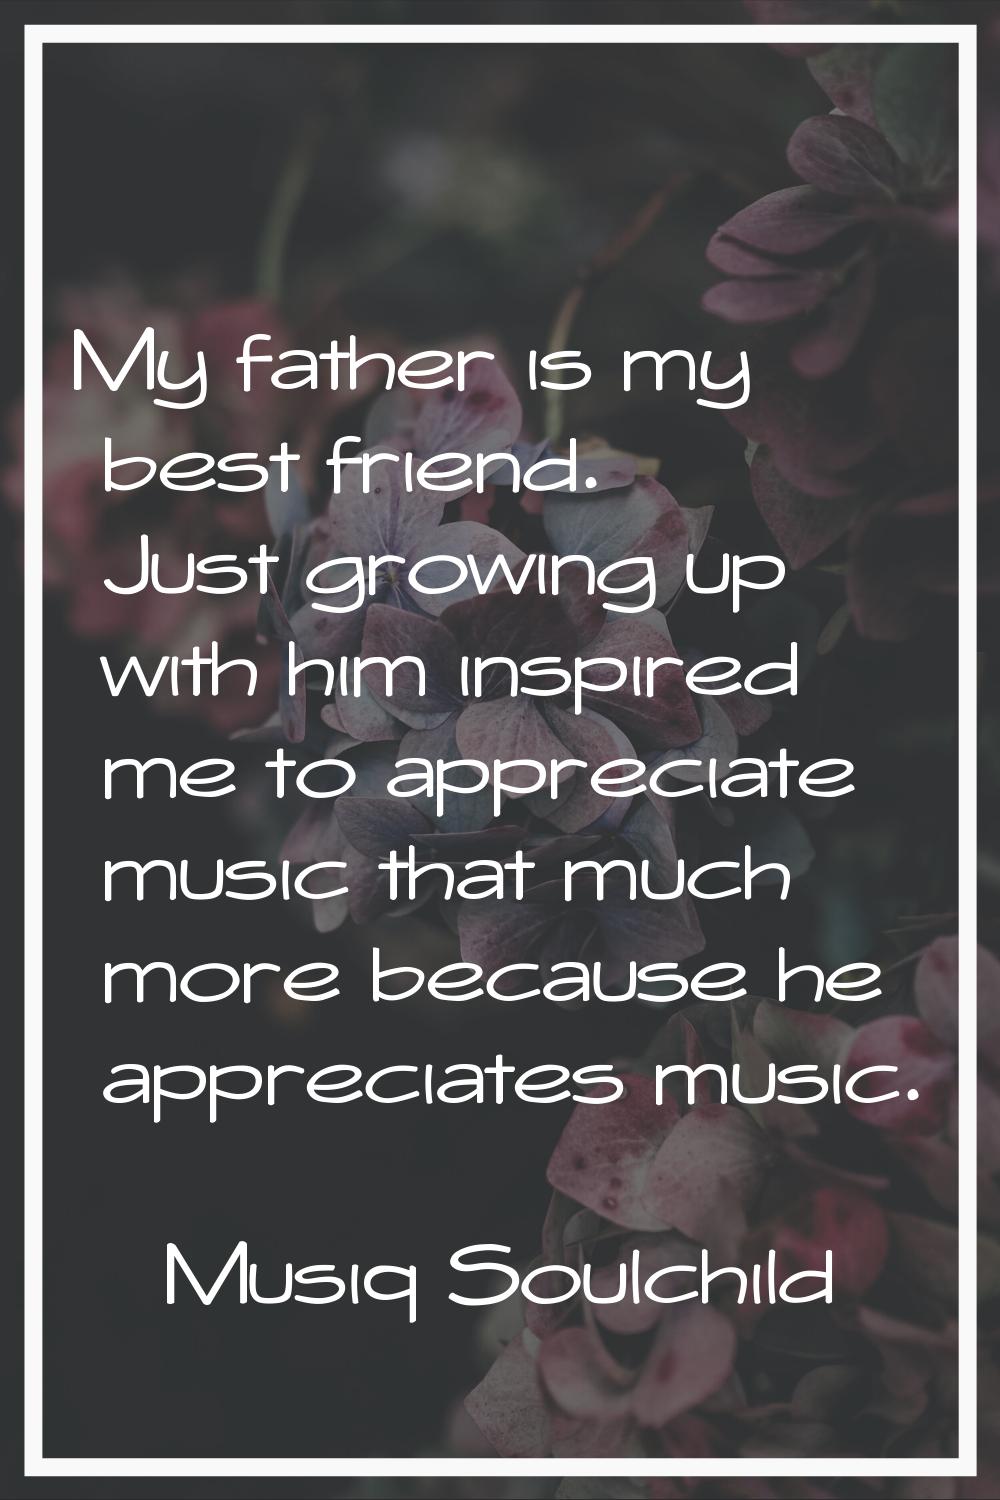 My father is my best friend. Just growing up with him inspired me to appreciate music that much mor